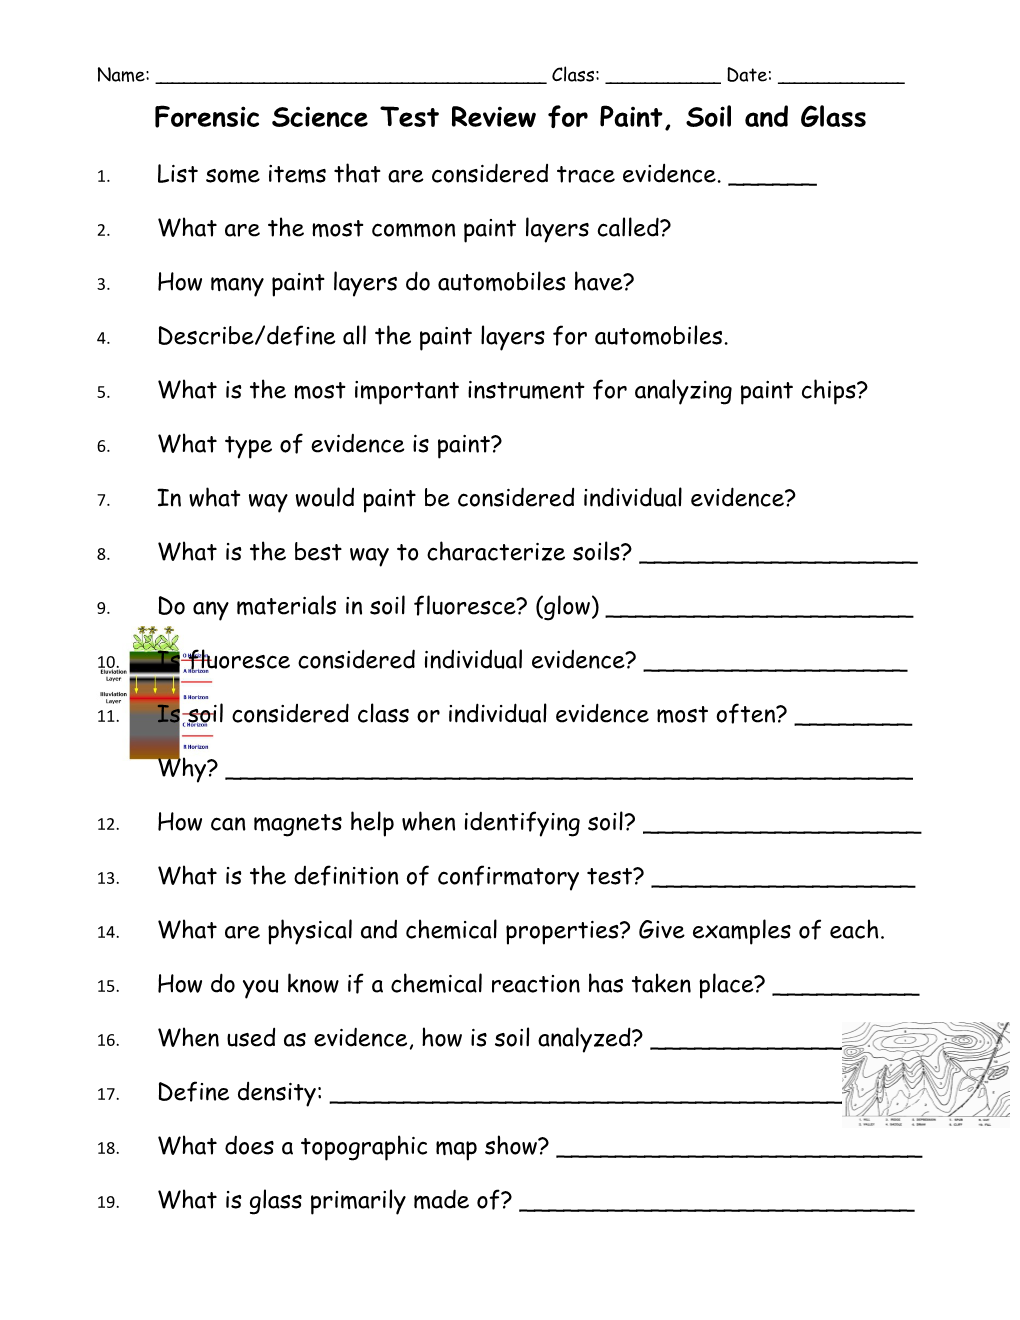 Forensic Science Test Review for Paint, Soil and Glass